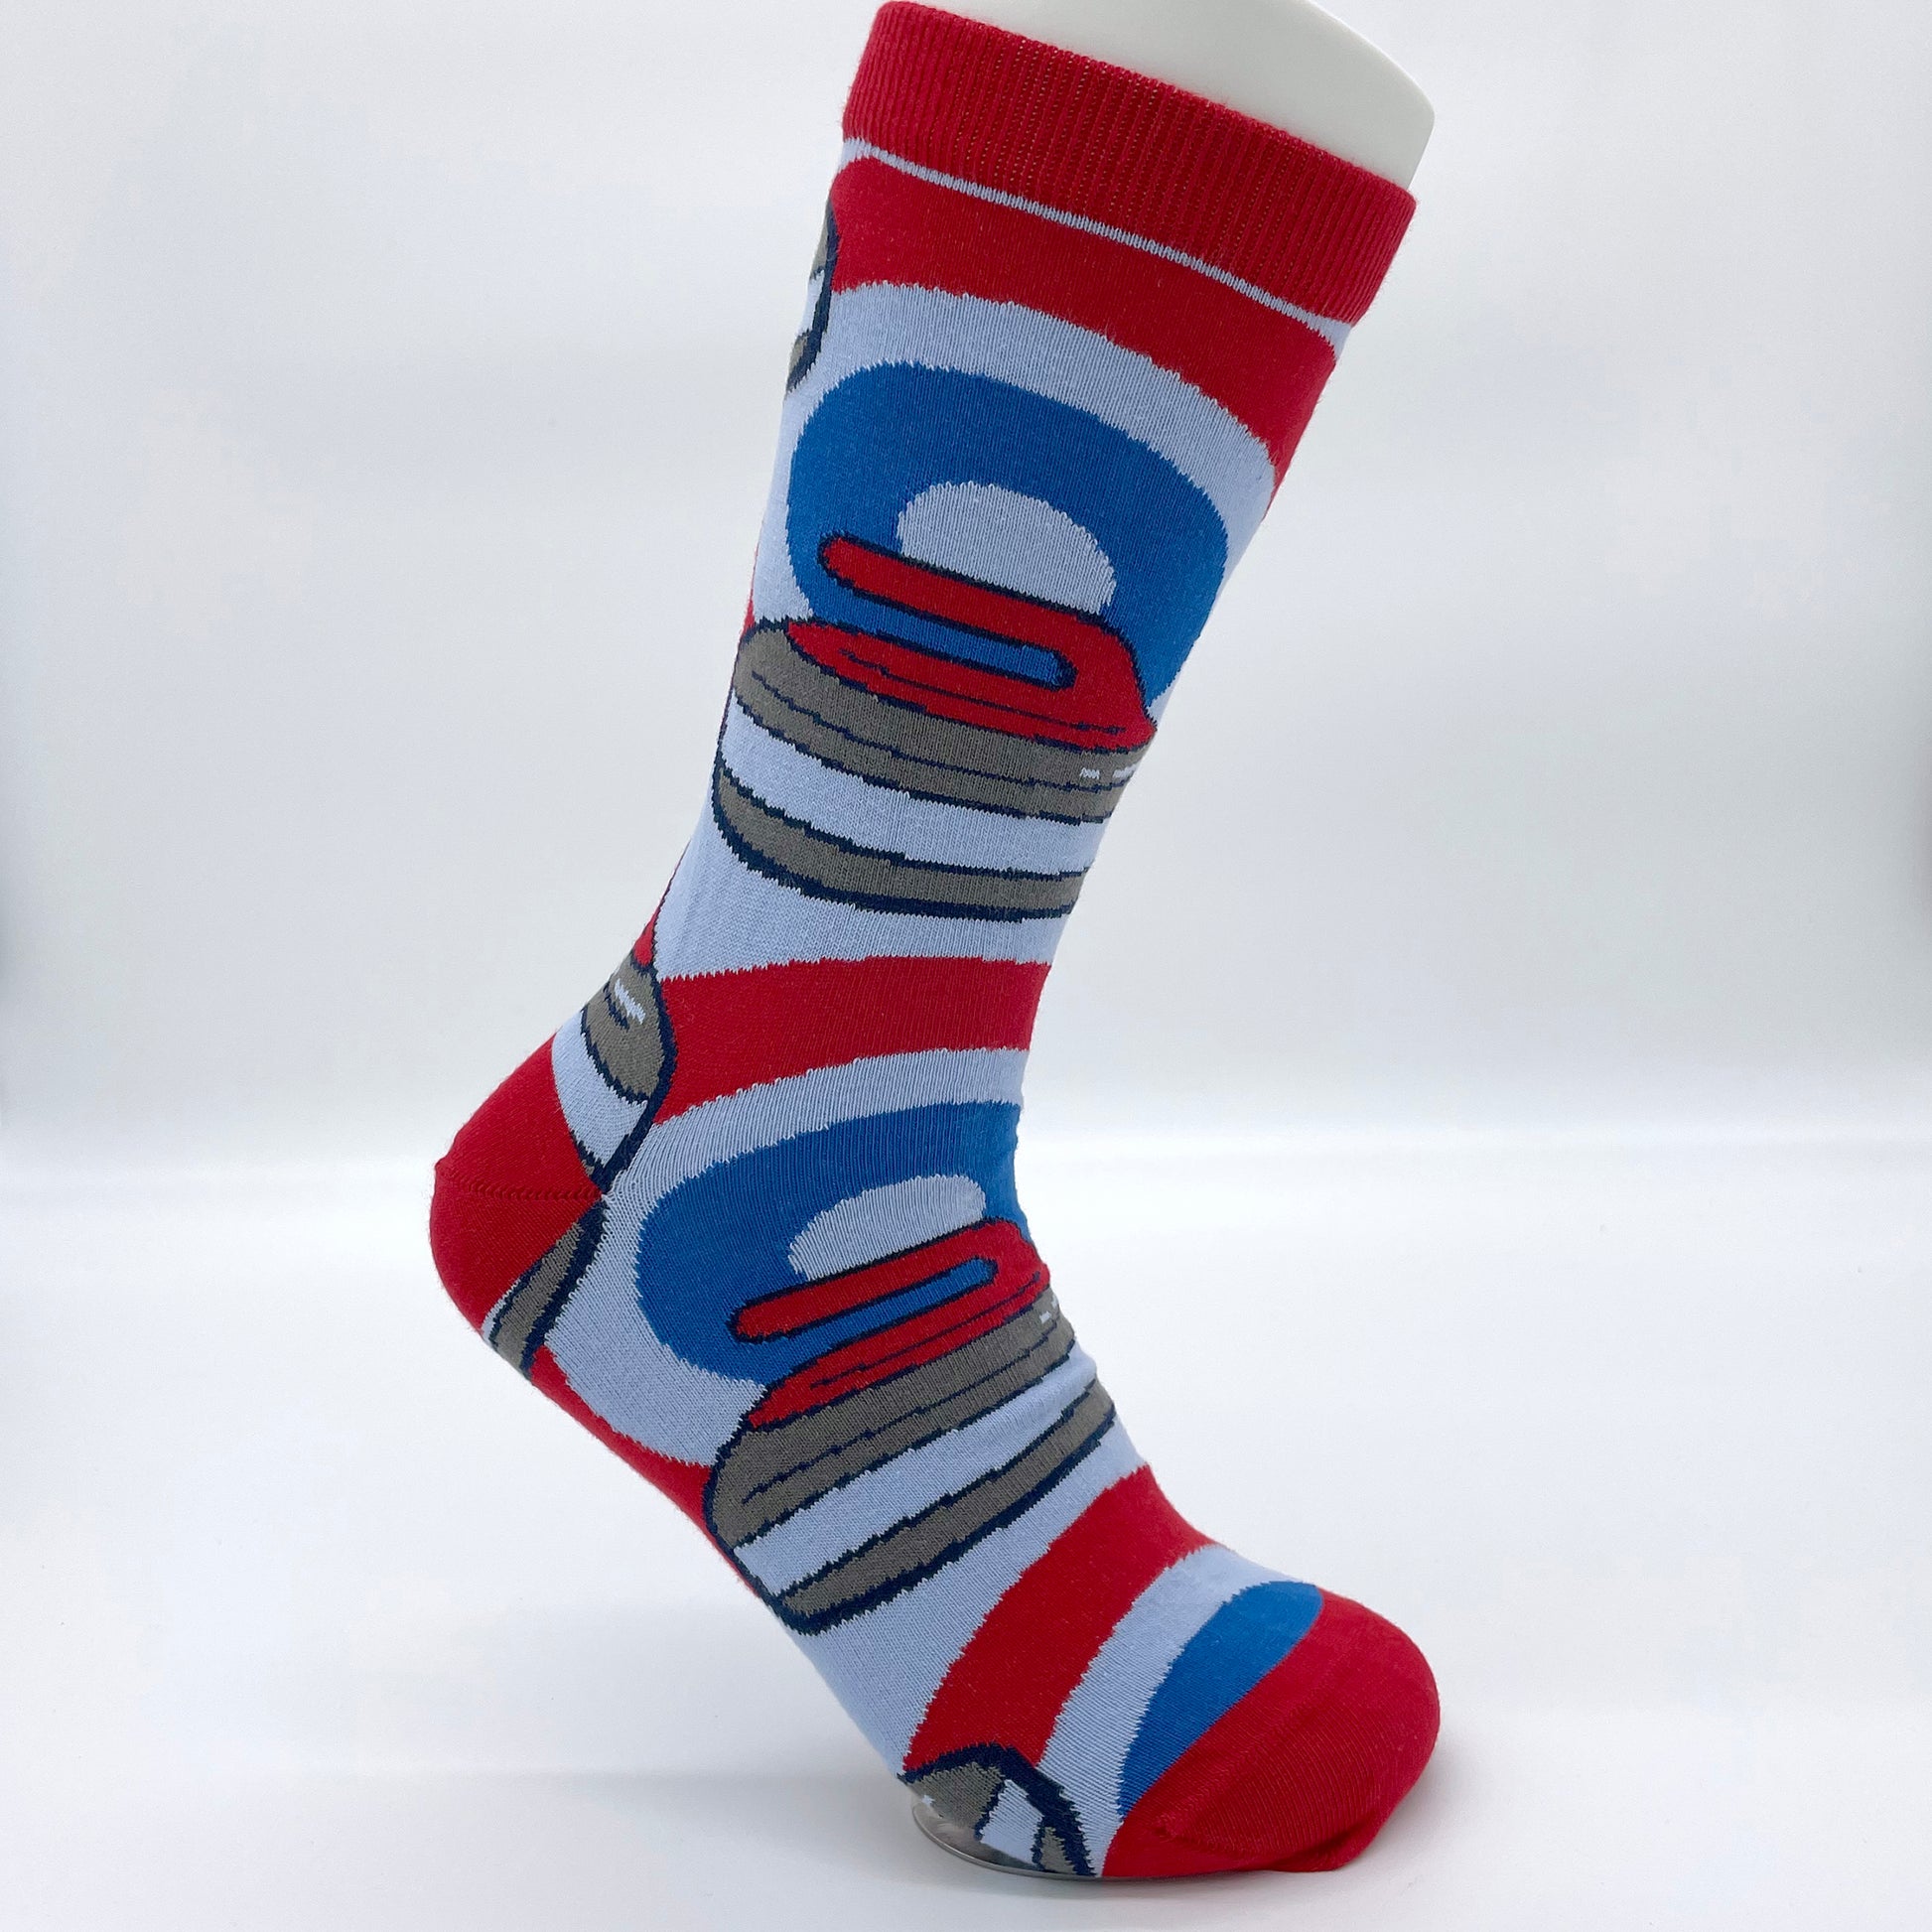 A white sock mannequin sports a blue and red pair of socks patterned with curling rocks.